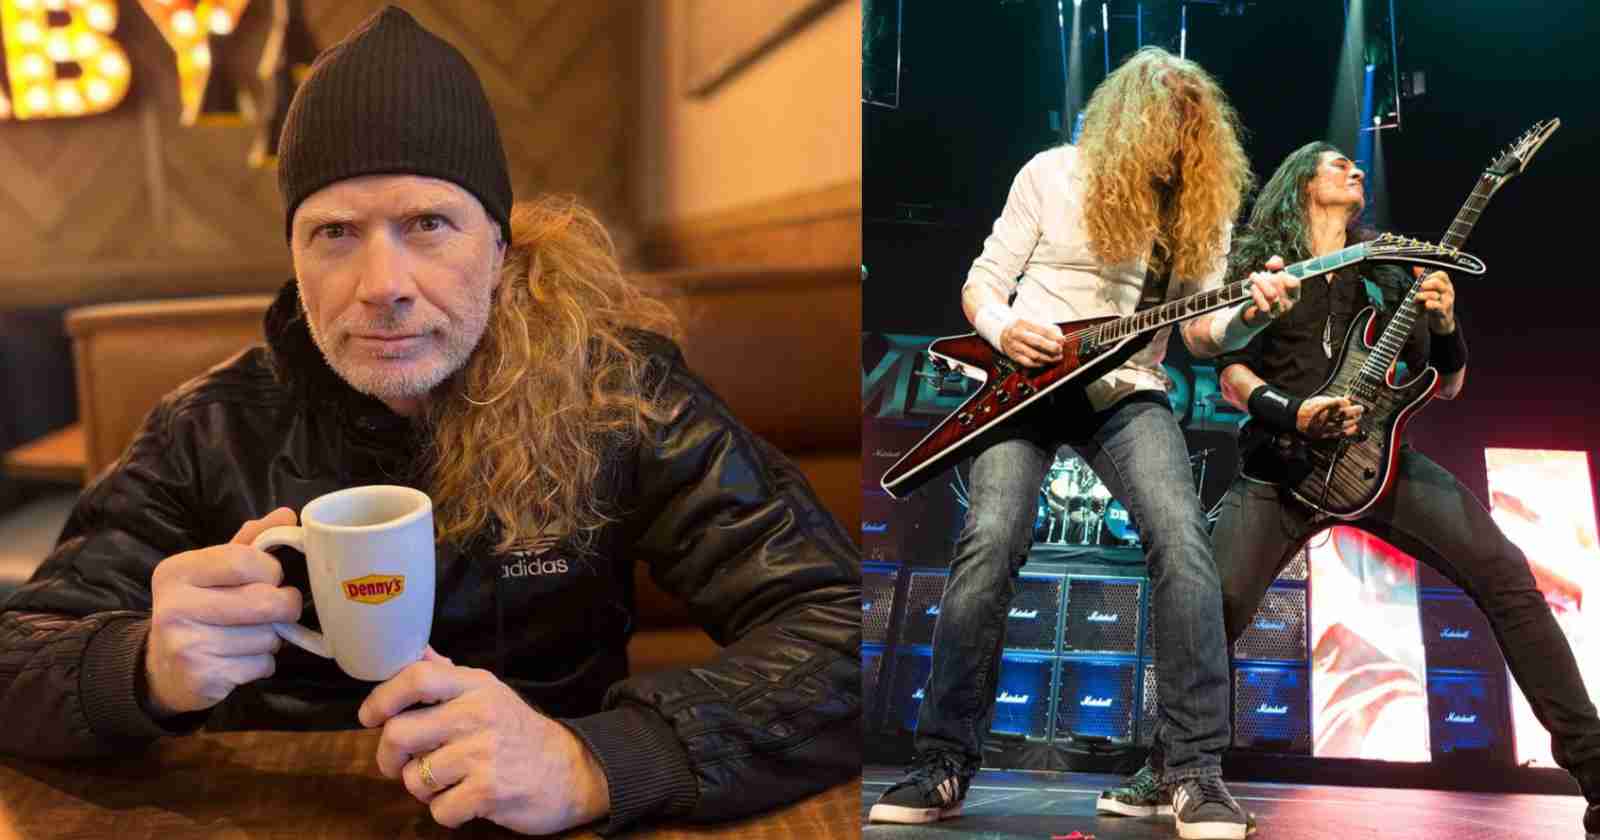 Dave Mustaine recalls funny moment with people wearing Megadeth shirts